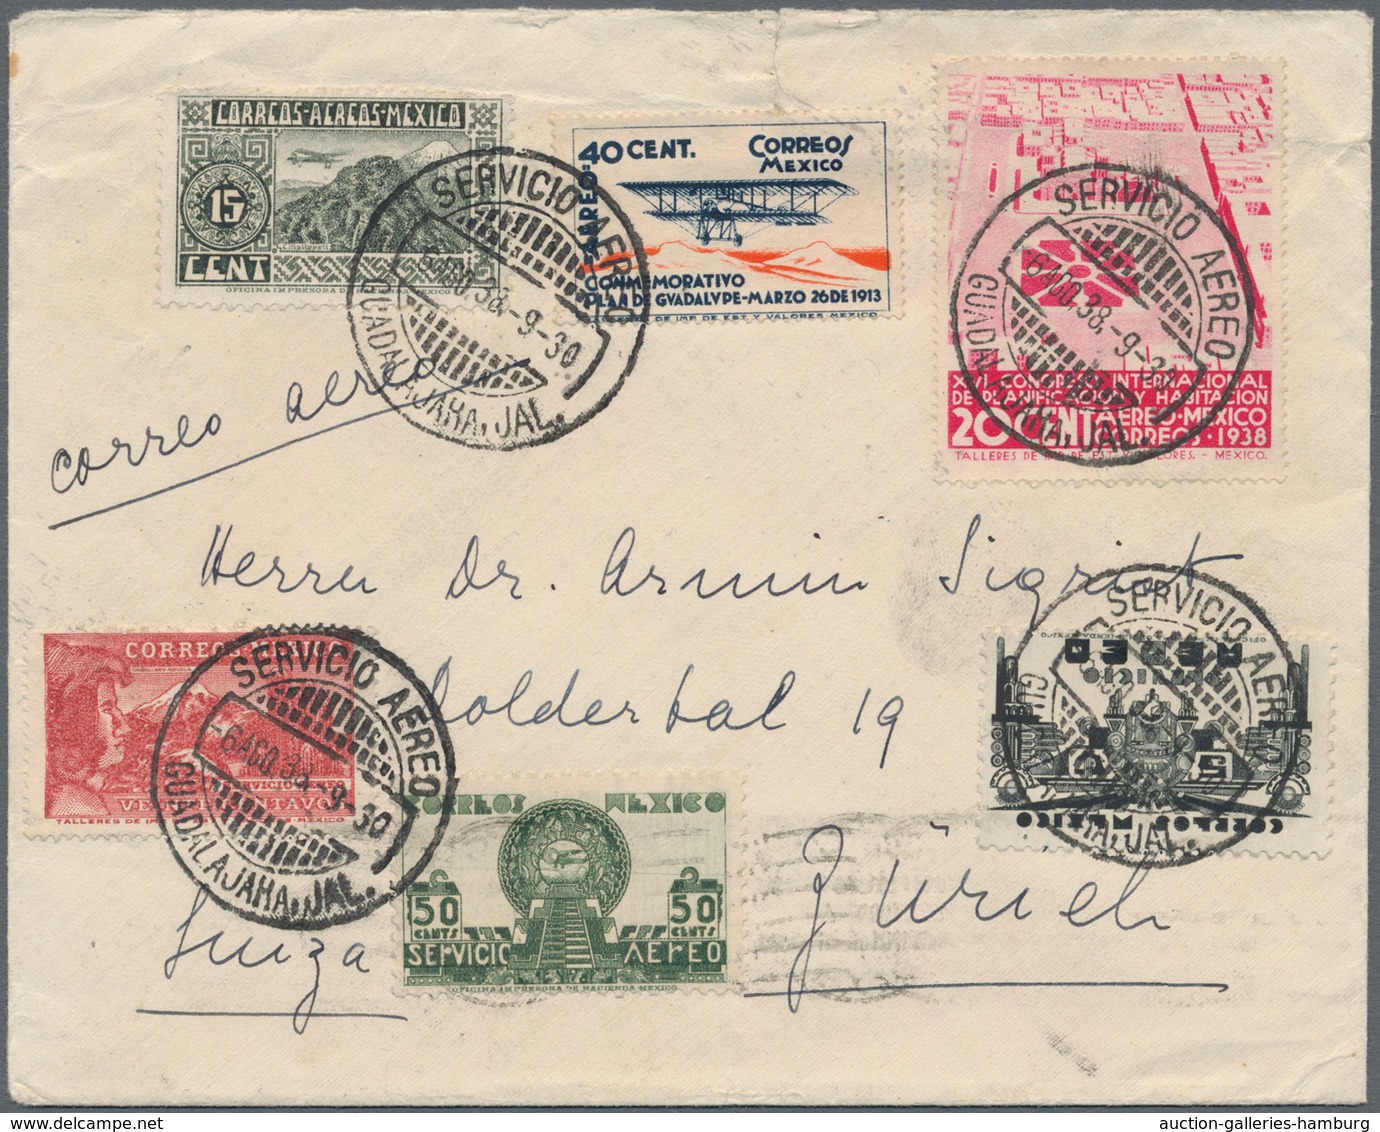 Amerika: 1885-1945 (c.), only few items later, holding of covers and post cards, including many regi